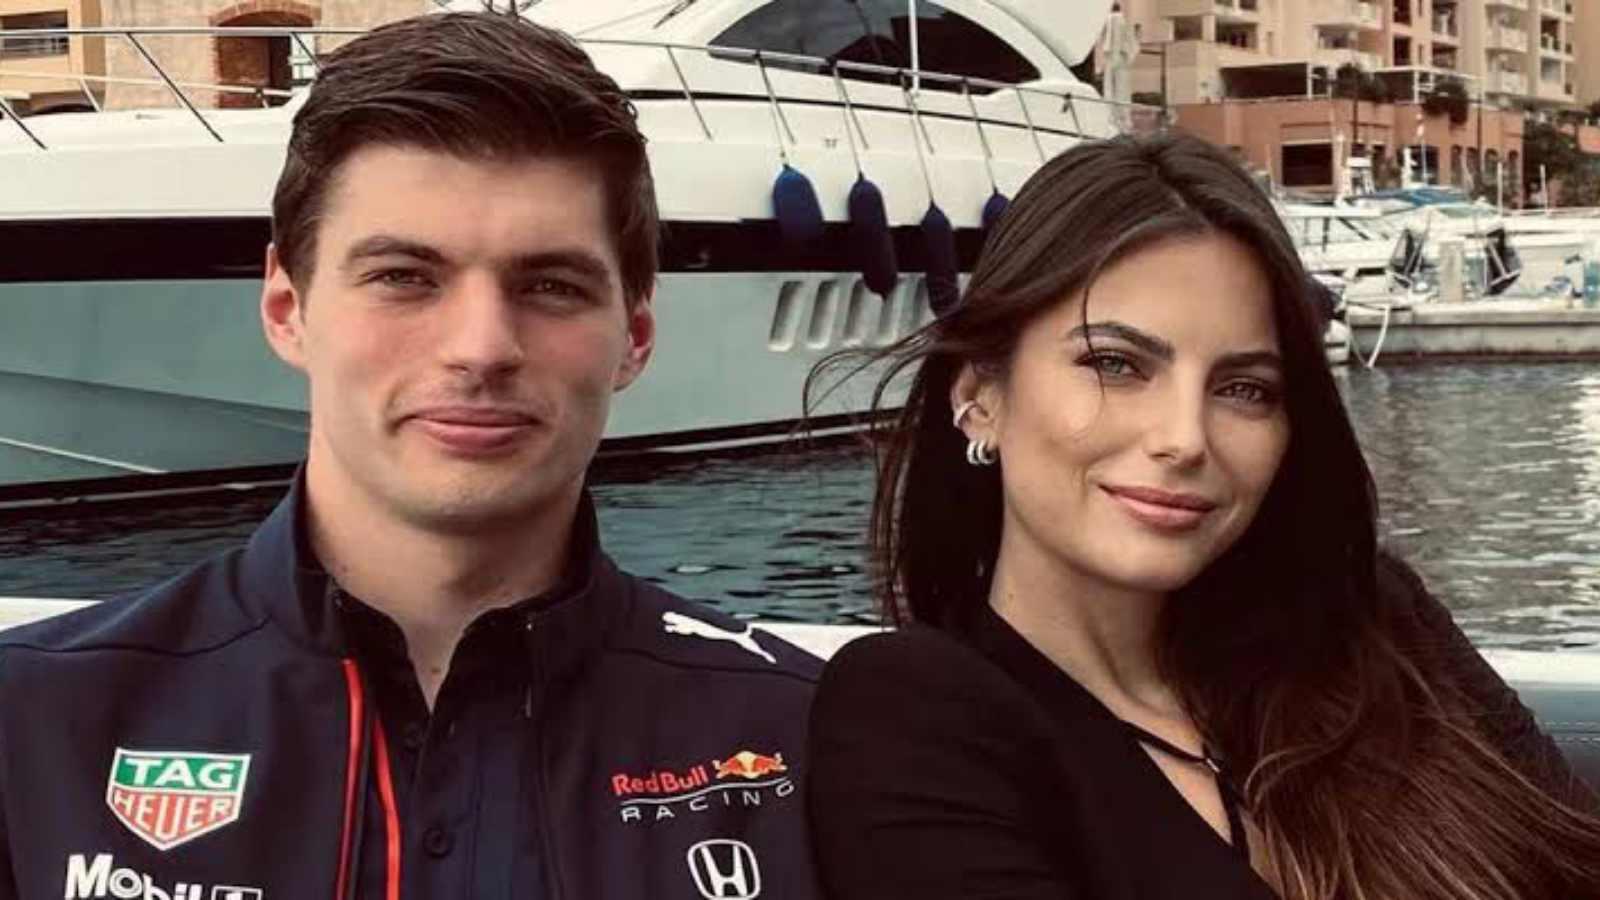 Max with her girlfriend Kelly Piquet, the daughter of the former F1 driver Nelson.